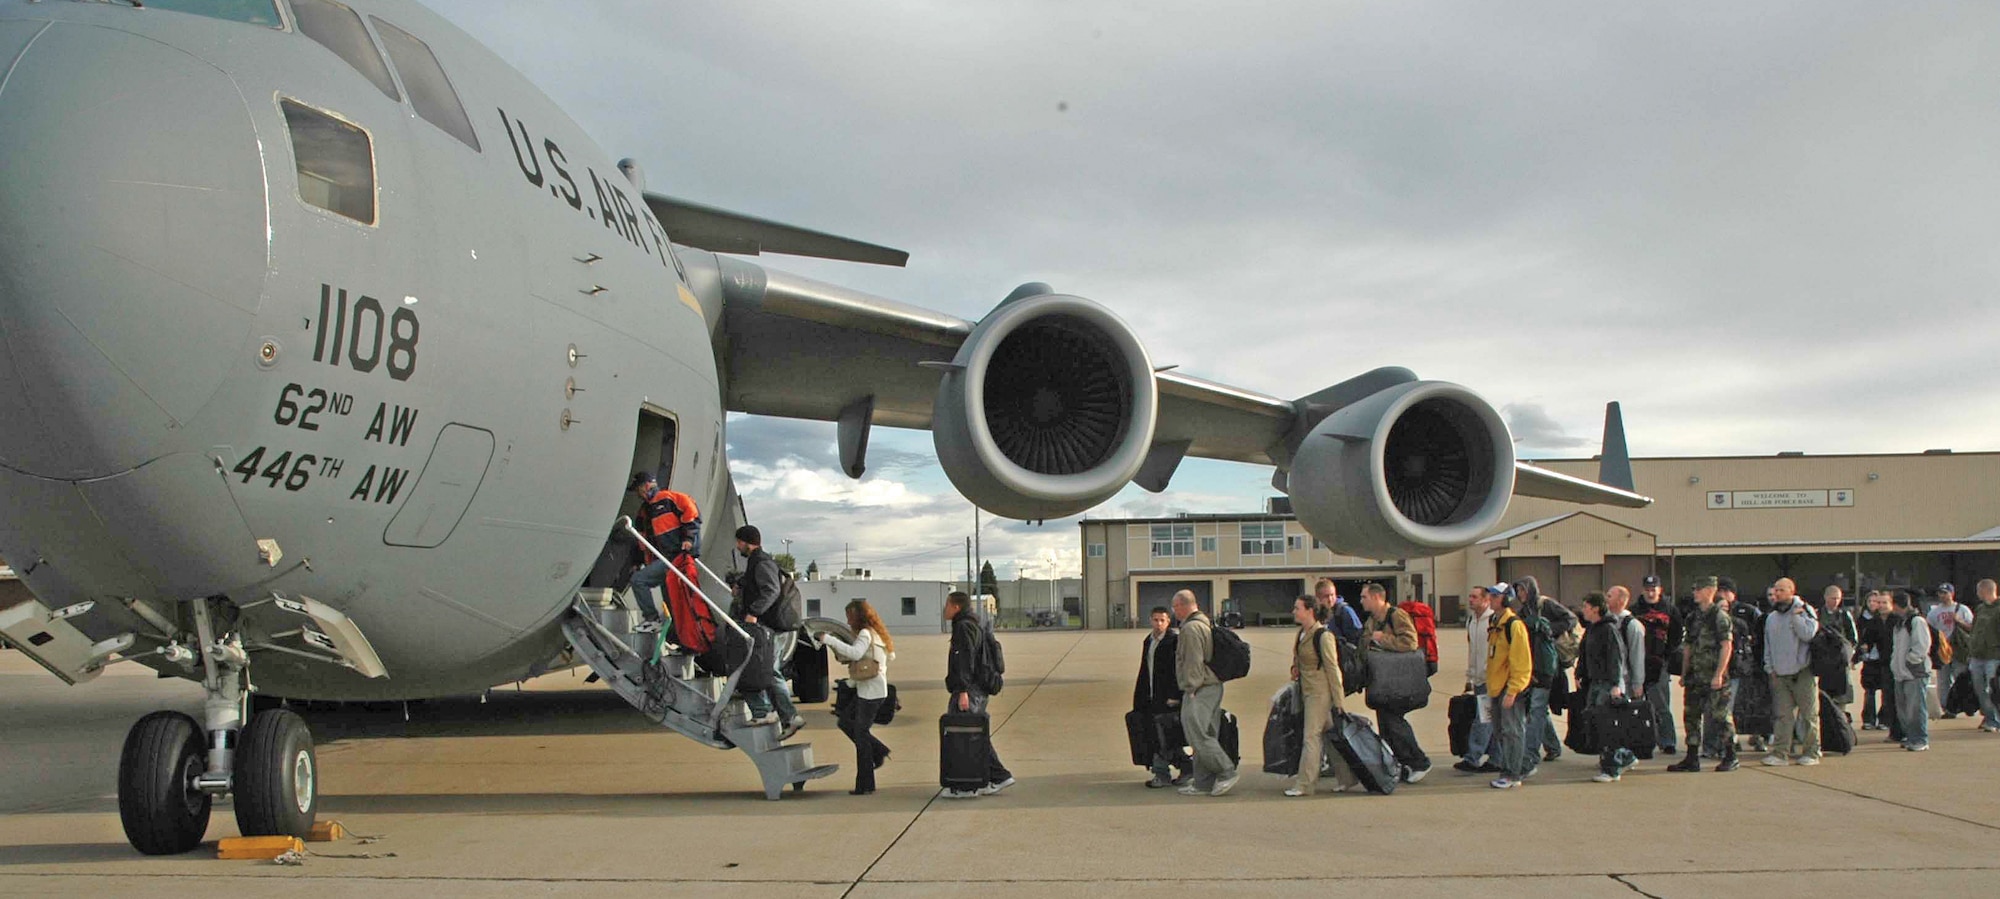 HILL AIR FORCE BASE, Utah - Reservists board a C-17 Globemaster III at Hill AFB. They are part of the 50  Reservists who fly to McChord AFB, Wash., monthly for unit training assemblies. (USAF photo by Staff Sgt. Nick Przybyciel)